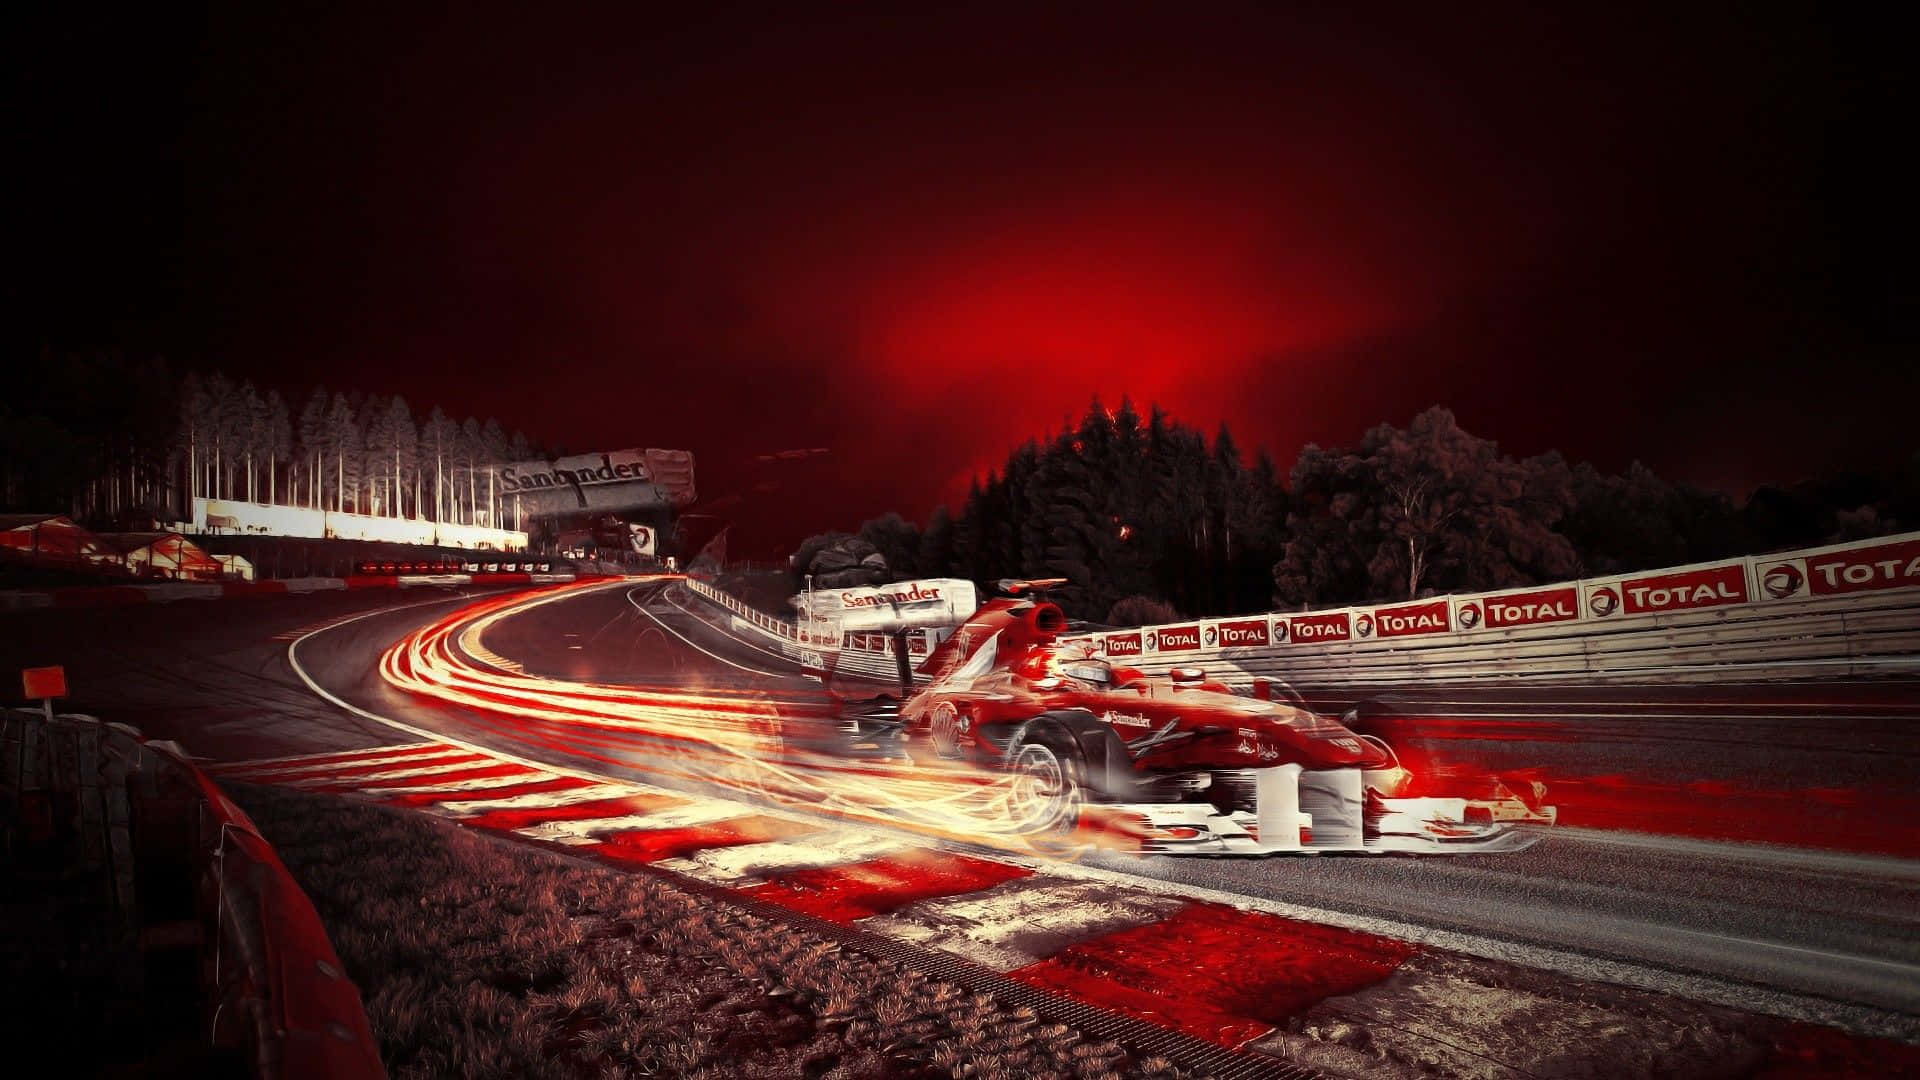 A Red Racing Car Driving Down A Track At Night